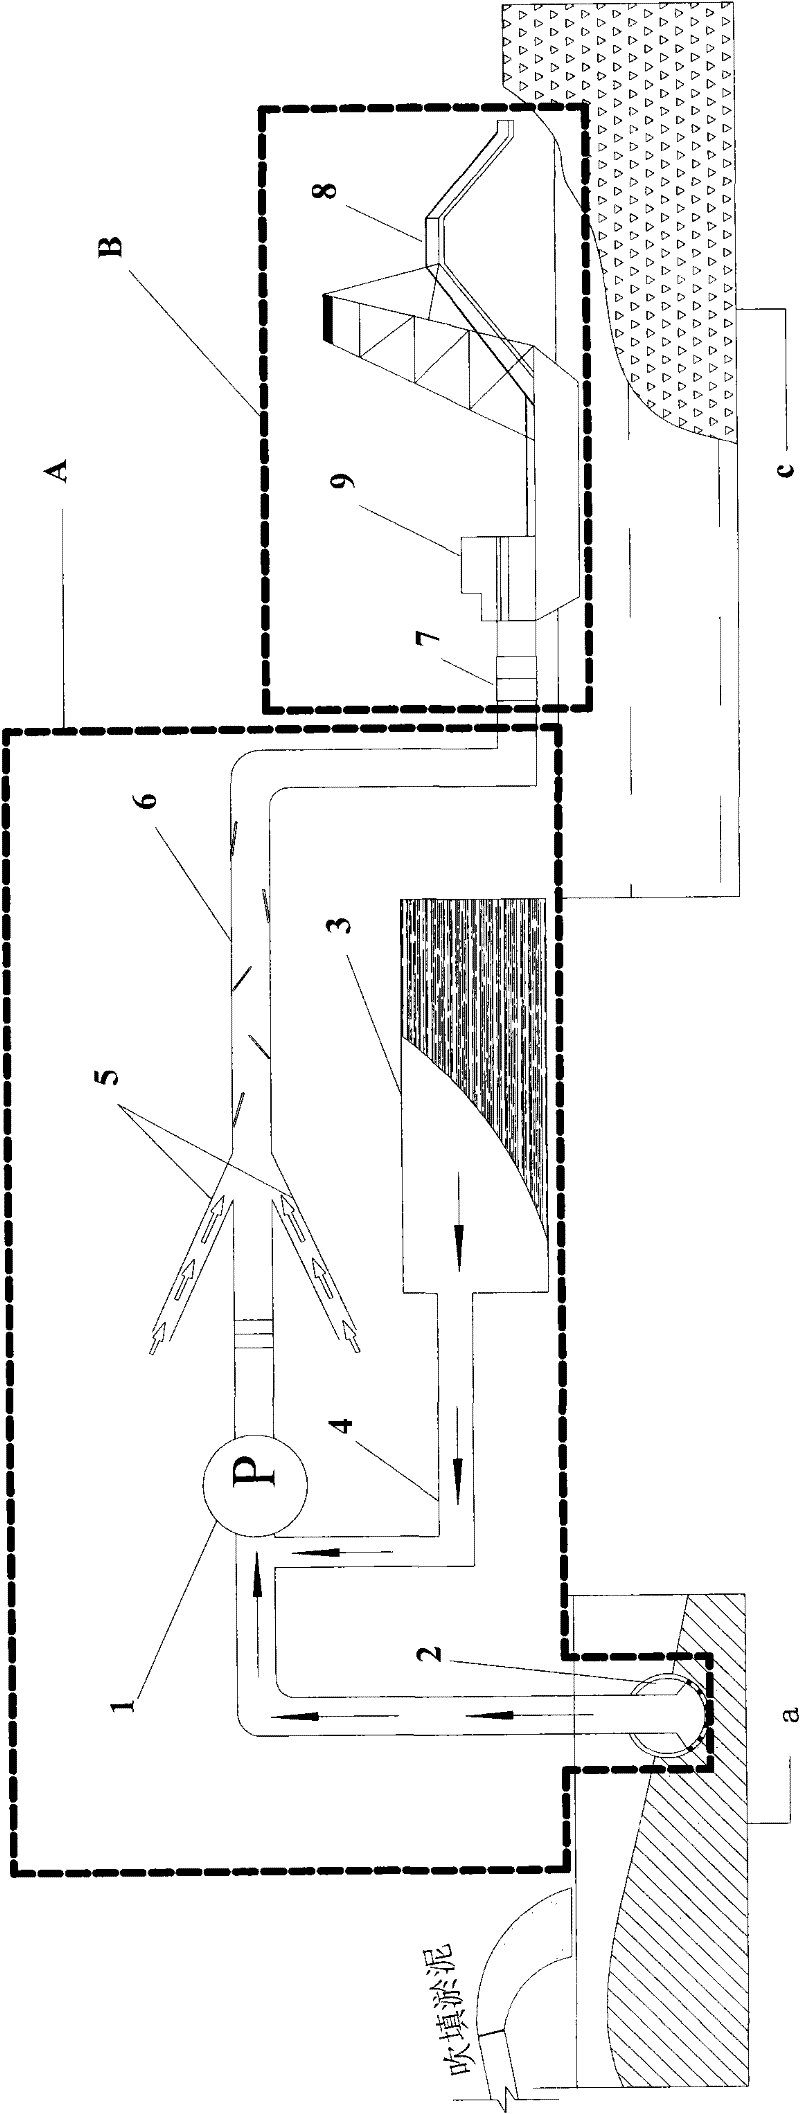 Construction process for reclamation by hydraulic filling of silt and device thereof